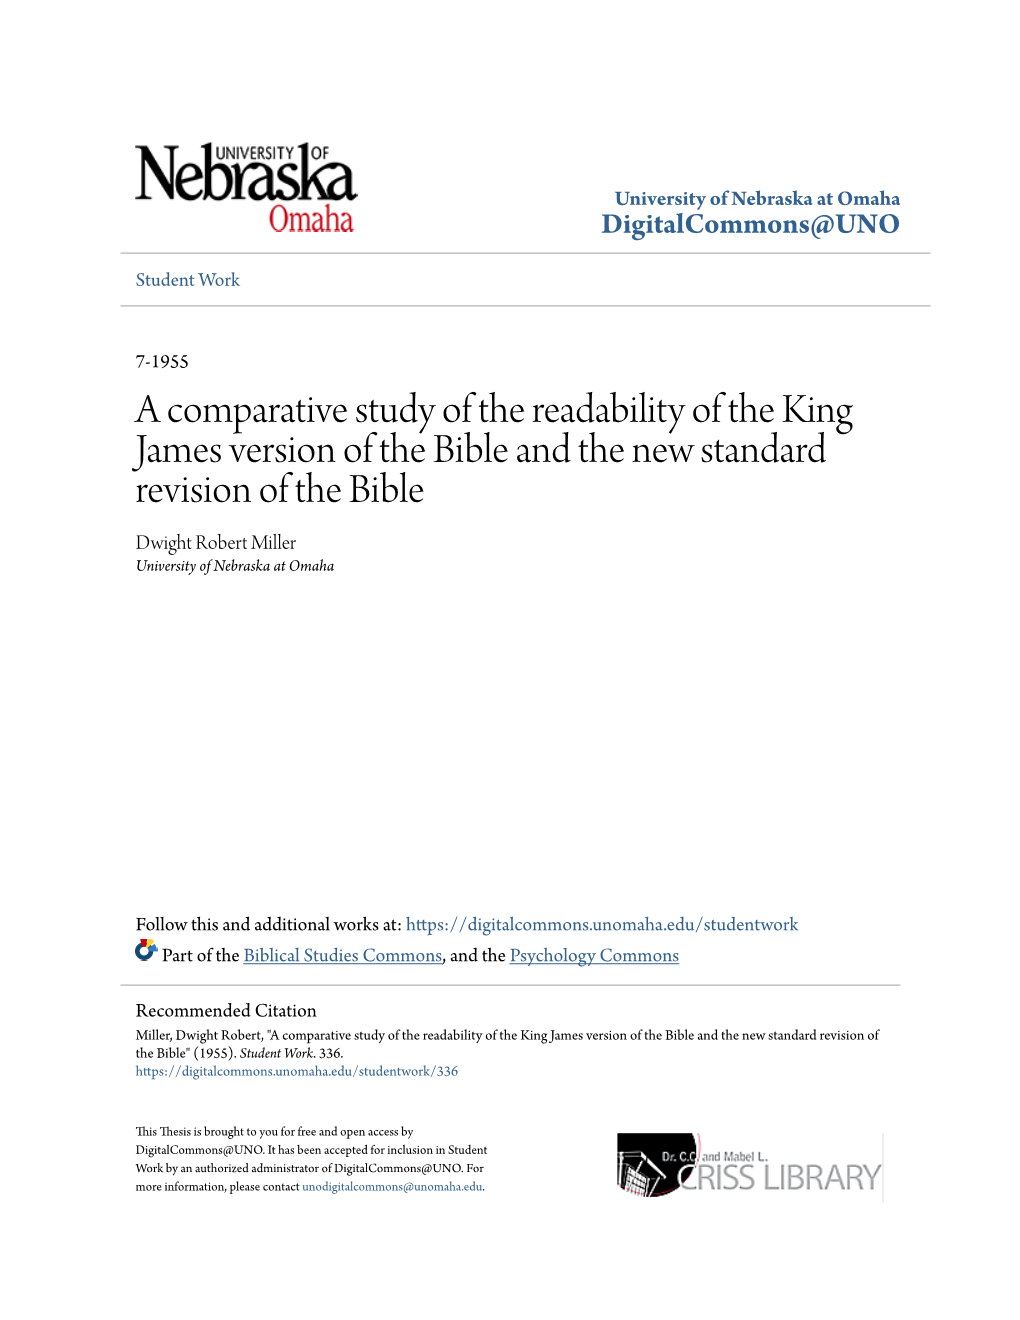 A Comparative Study of the Readability of the King James Version of the Bible and the New Standard Revision of the Bible